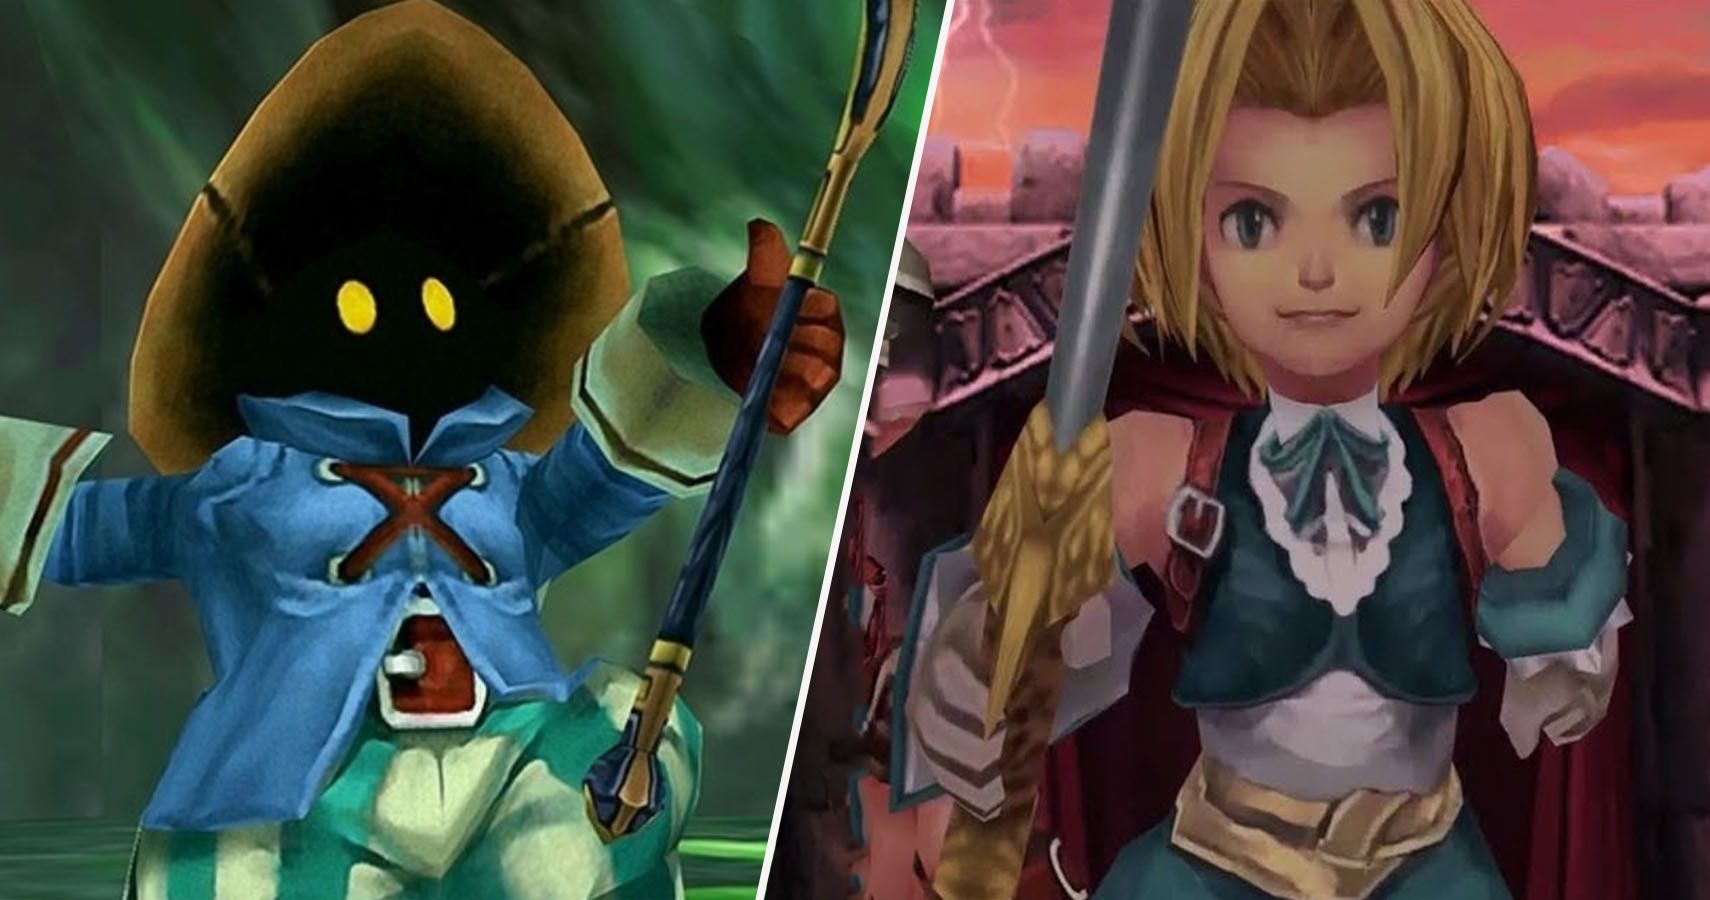 Final Fantasy 9: The 10 Craziest Things Cut From The Game